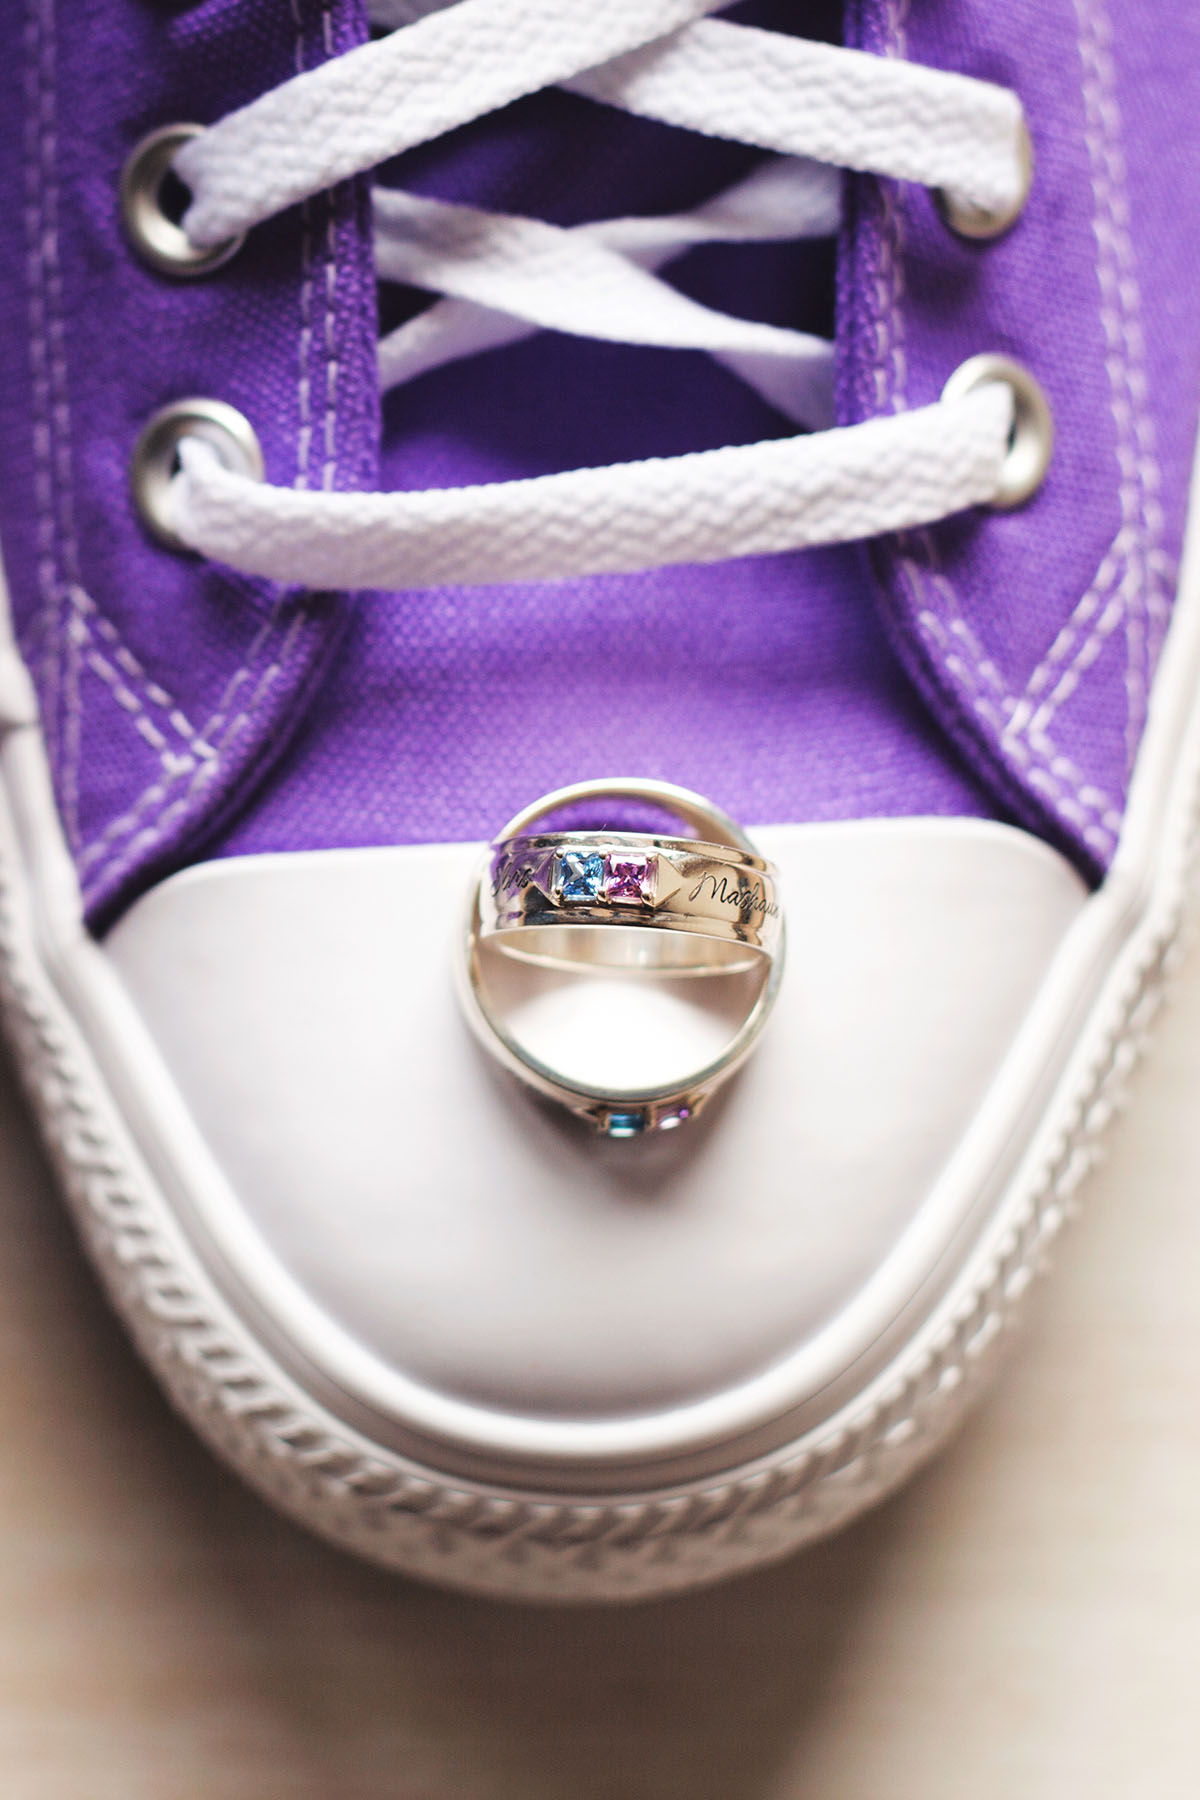 Simple, classy Georgia wedding with amethyst and aquamarine colors Converse rings bands